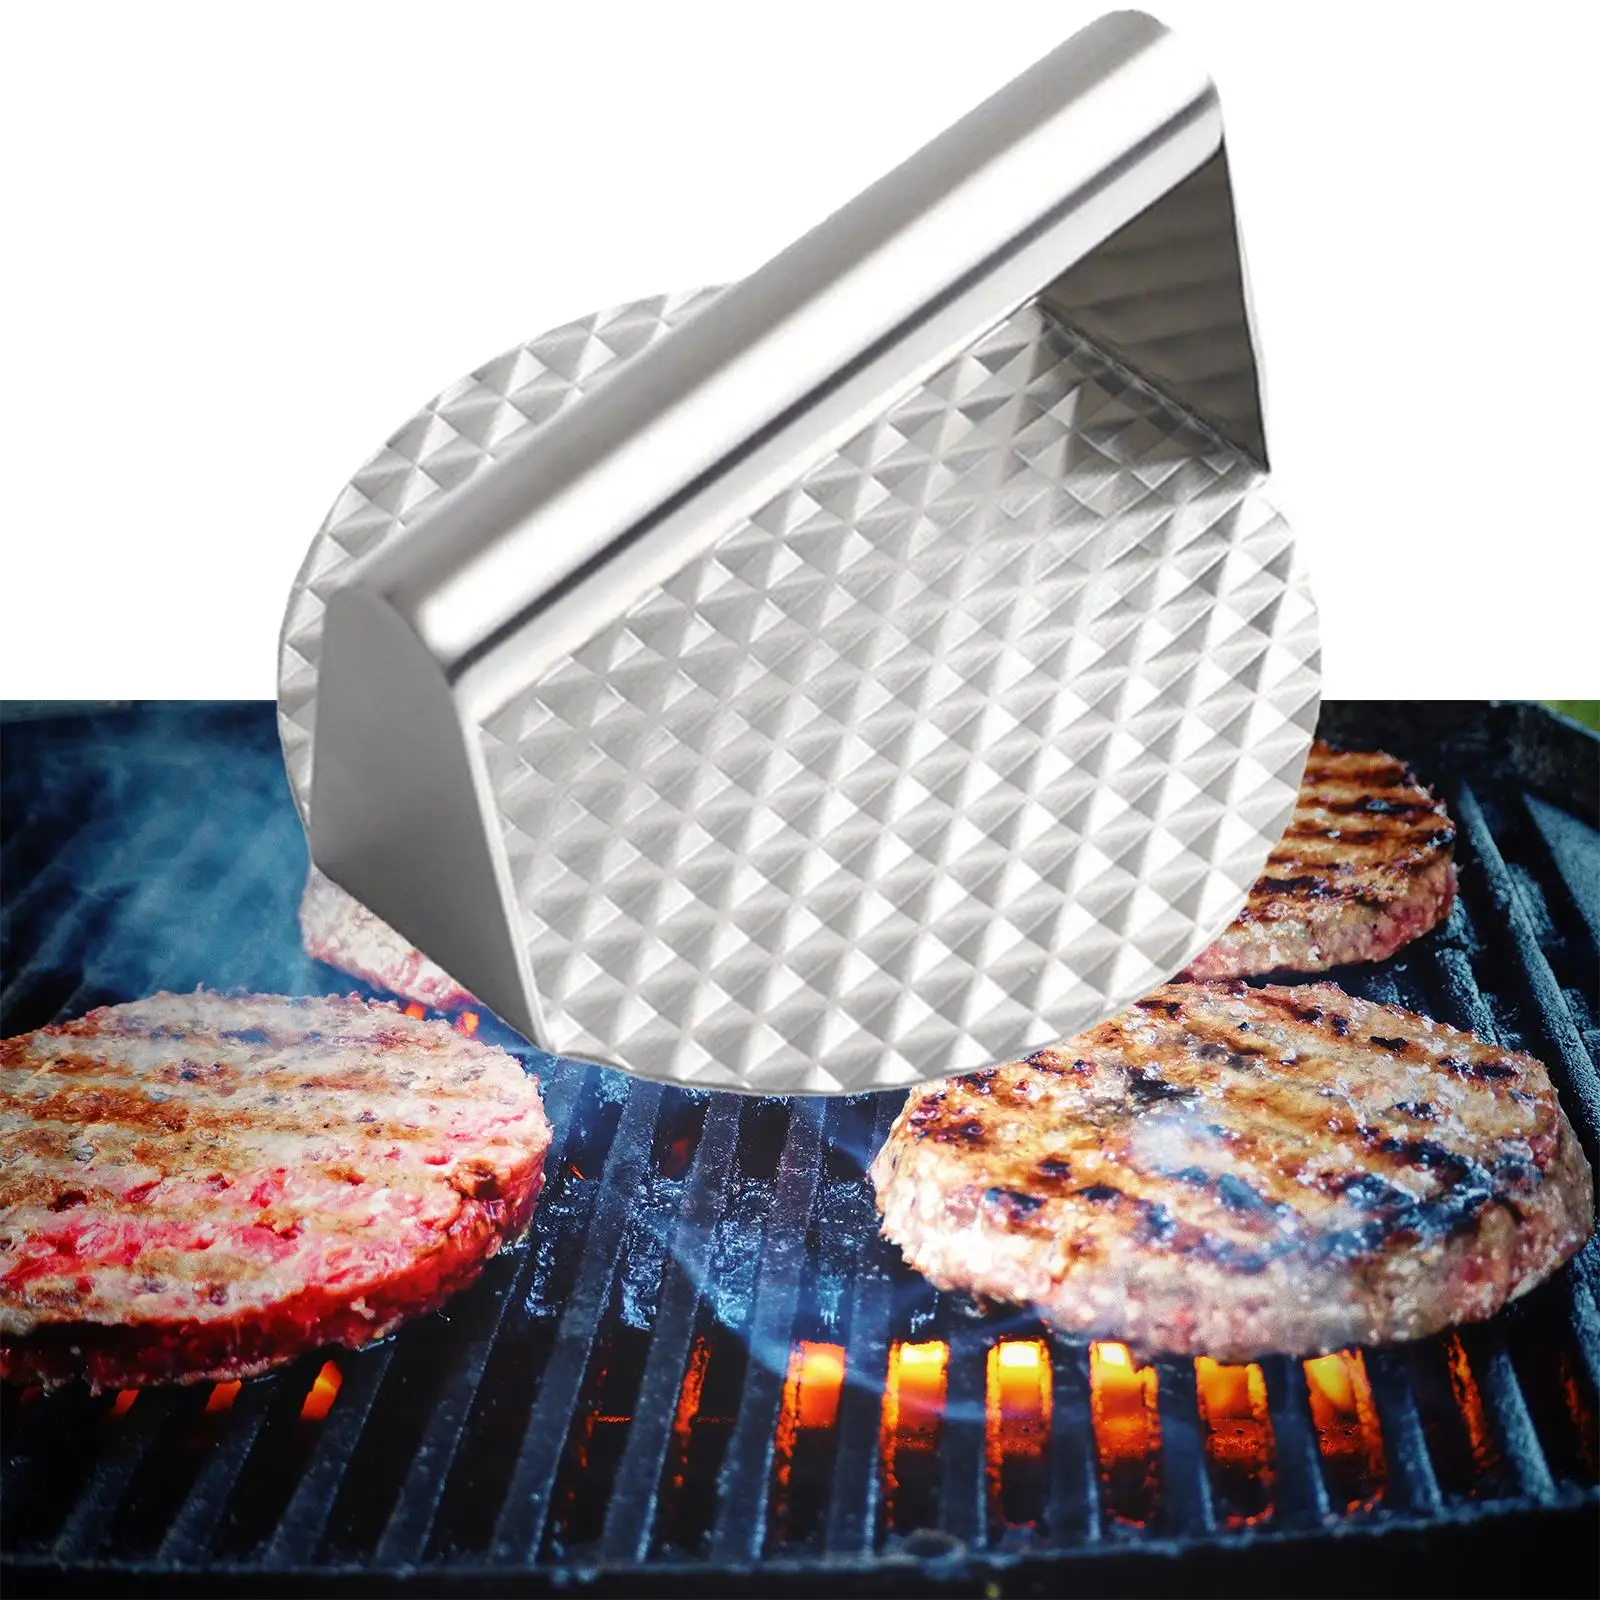 Burger Press Presser Patty Maker Non Sticky Kitchen Tool burger Smasher Grill Press for Cooking Meat Steak Utensil Tools